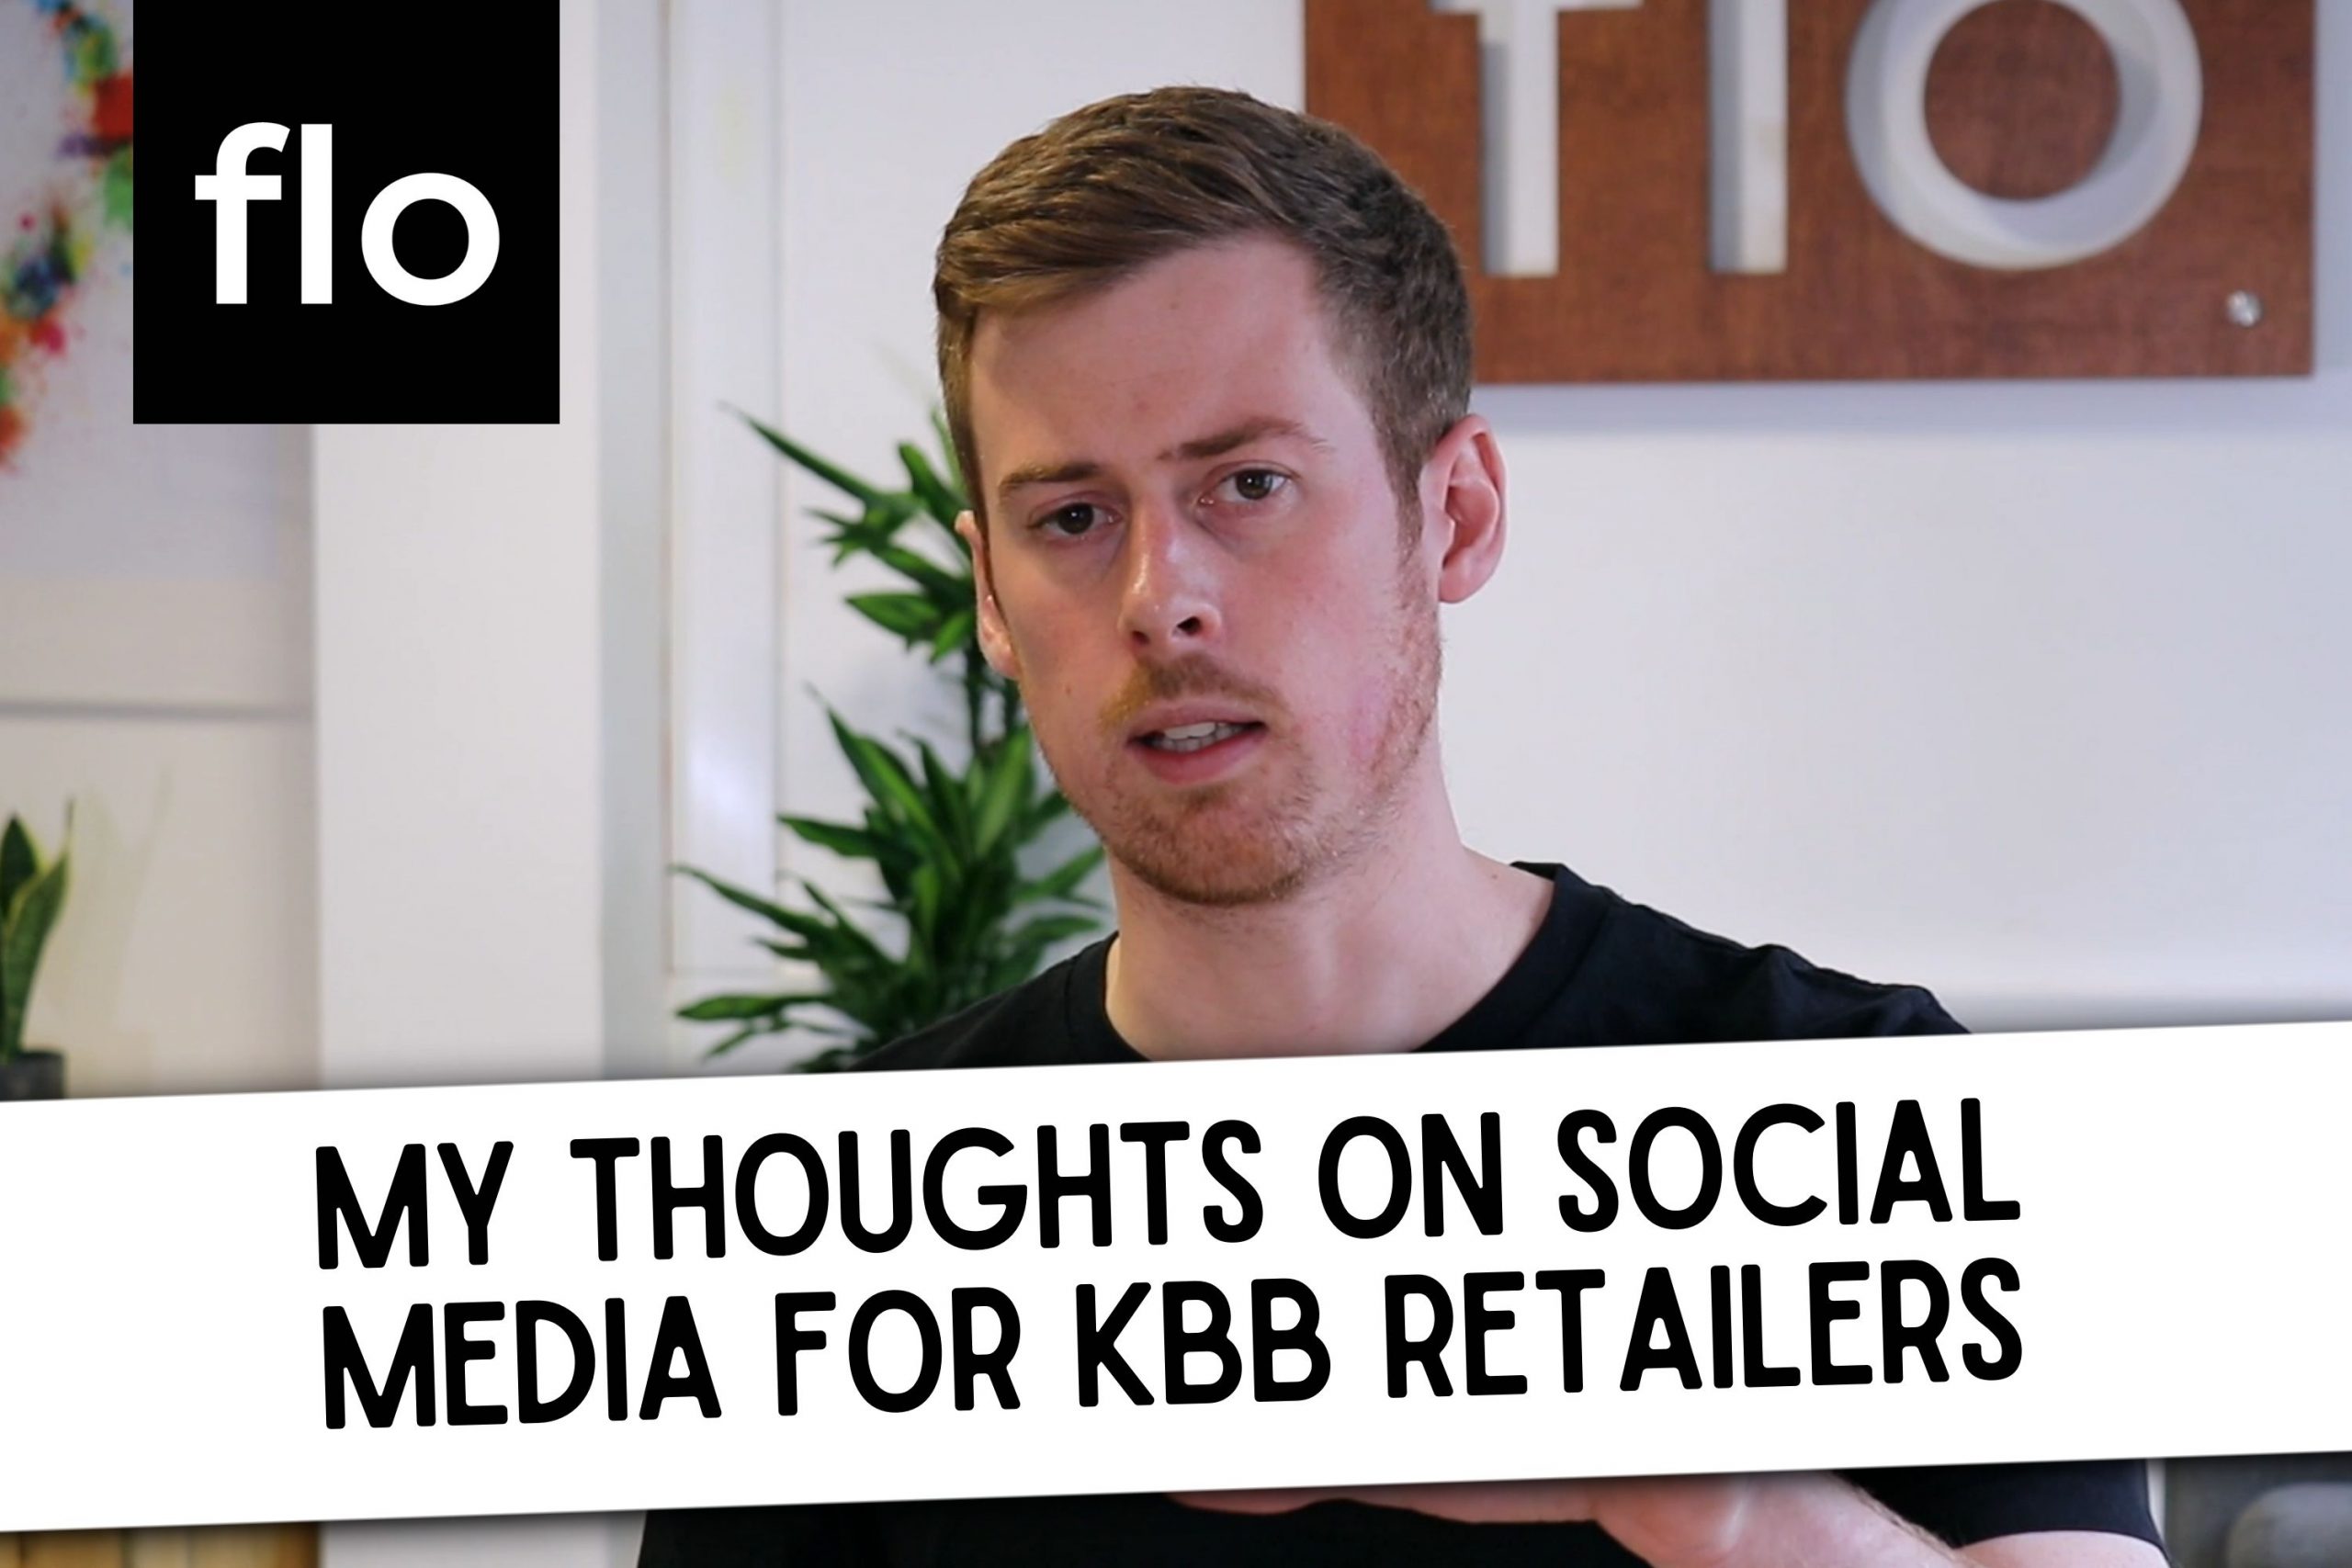 Video: My thoughts on social media for KBB retailers